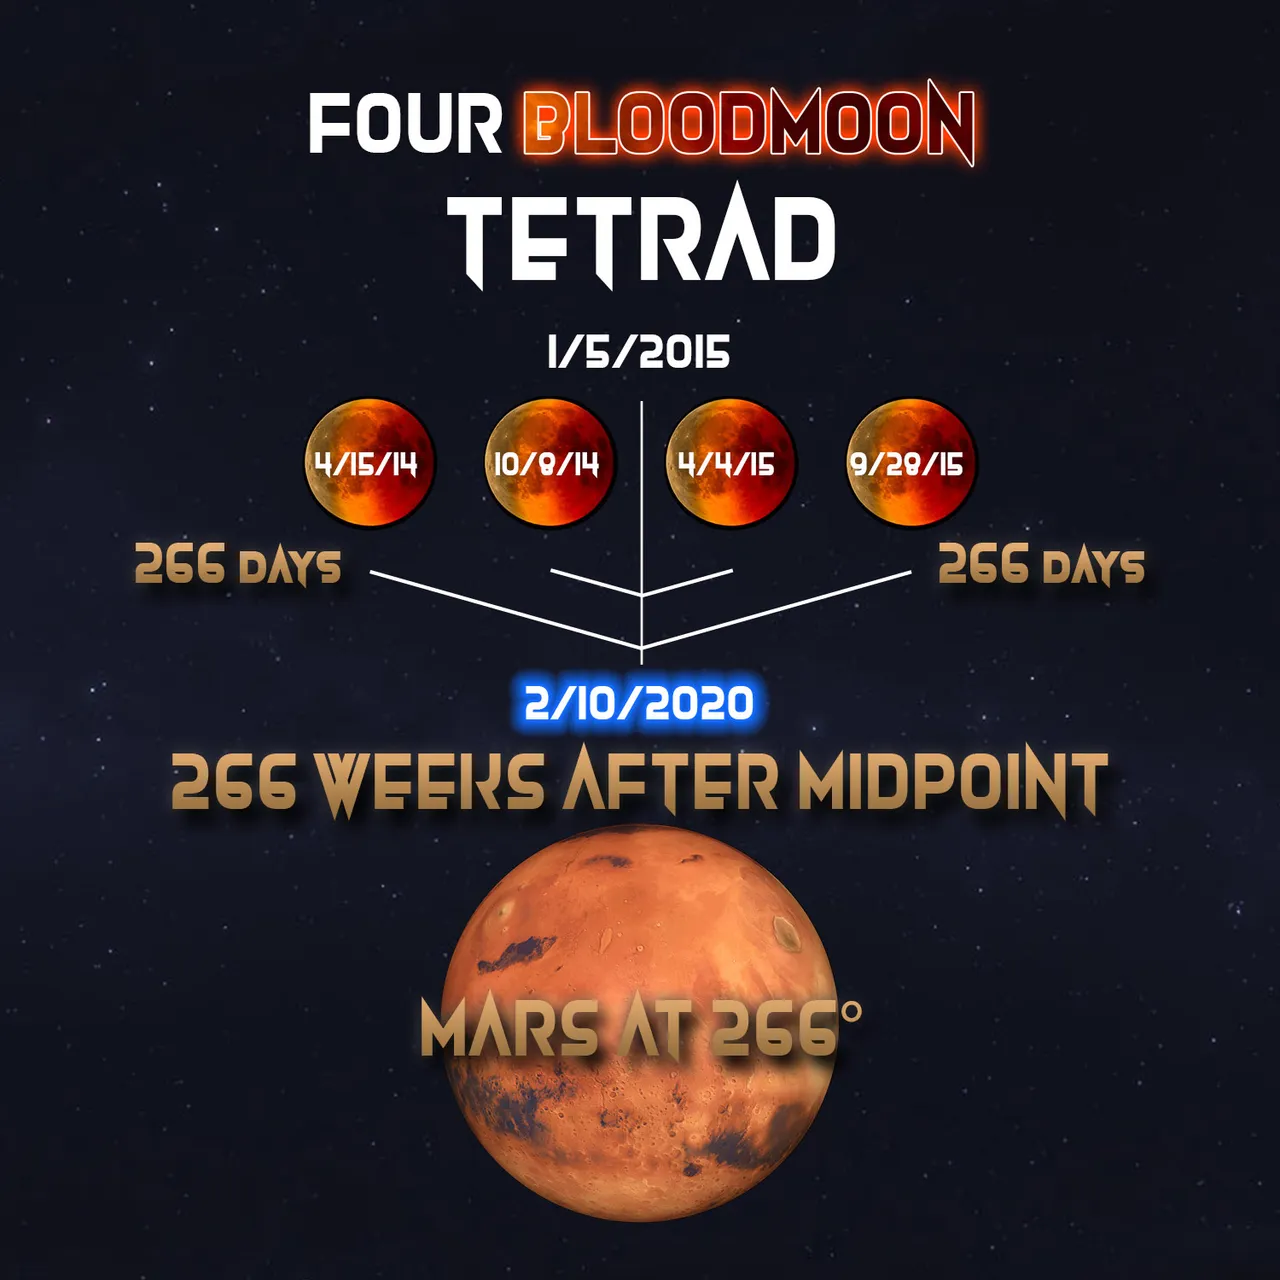 APX Four Bloodmoon Tetrad 266 weeks after midpoint Mars at 266°.jpg